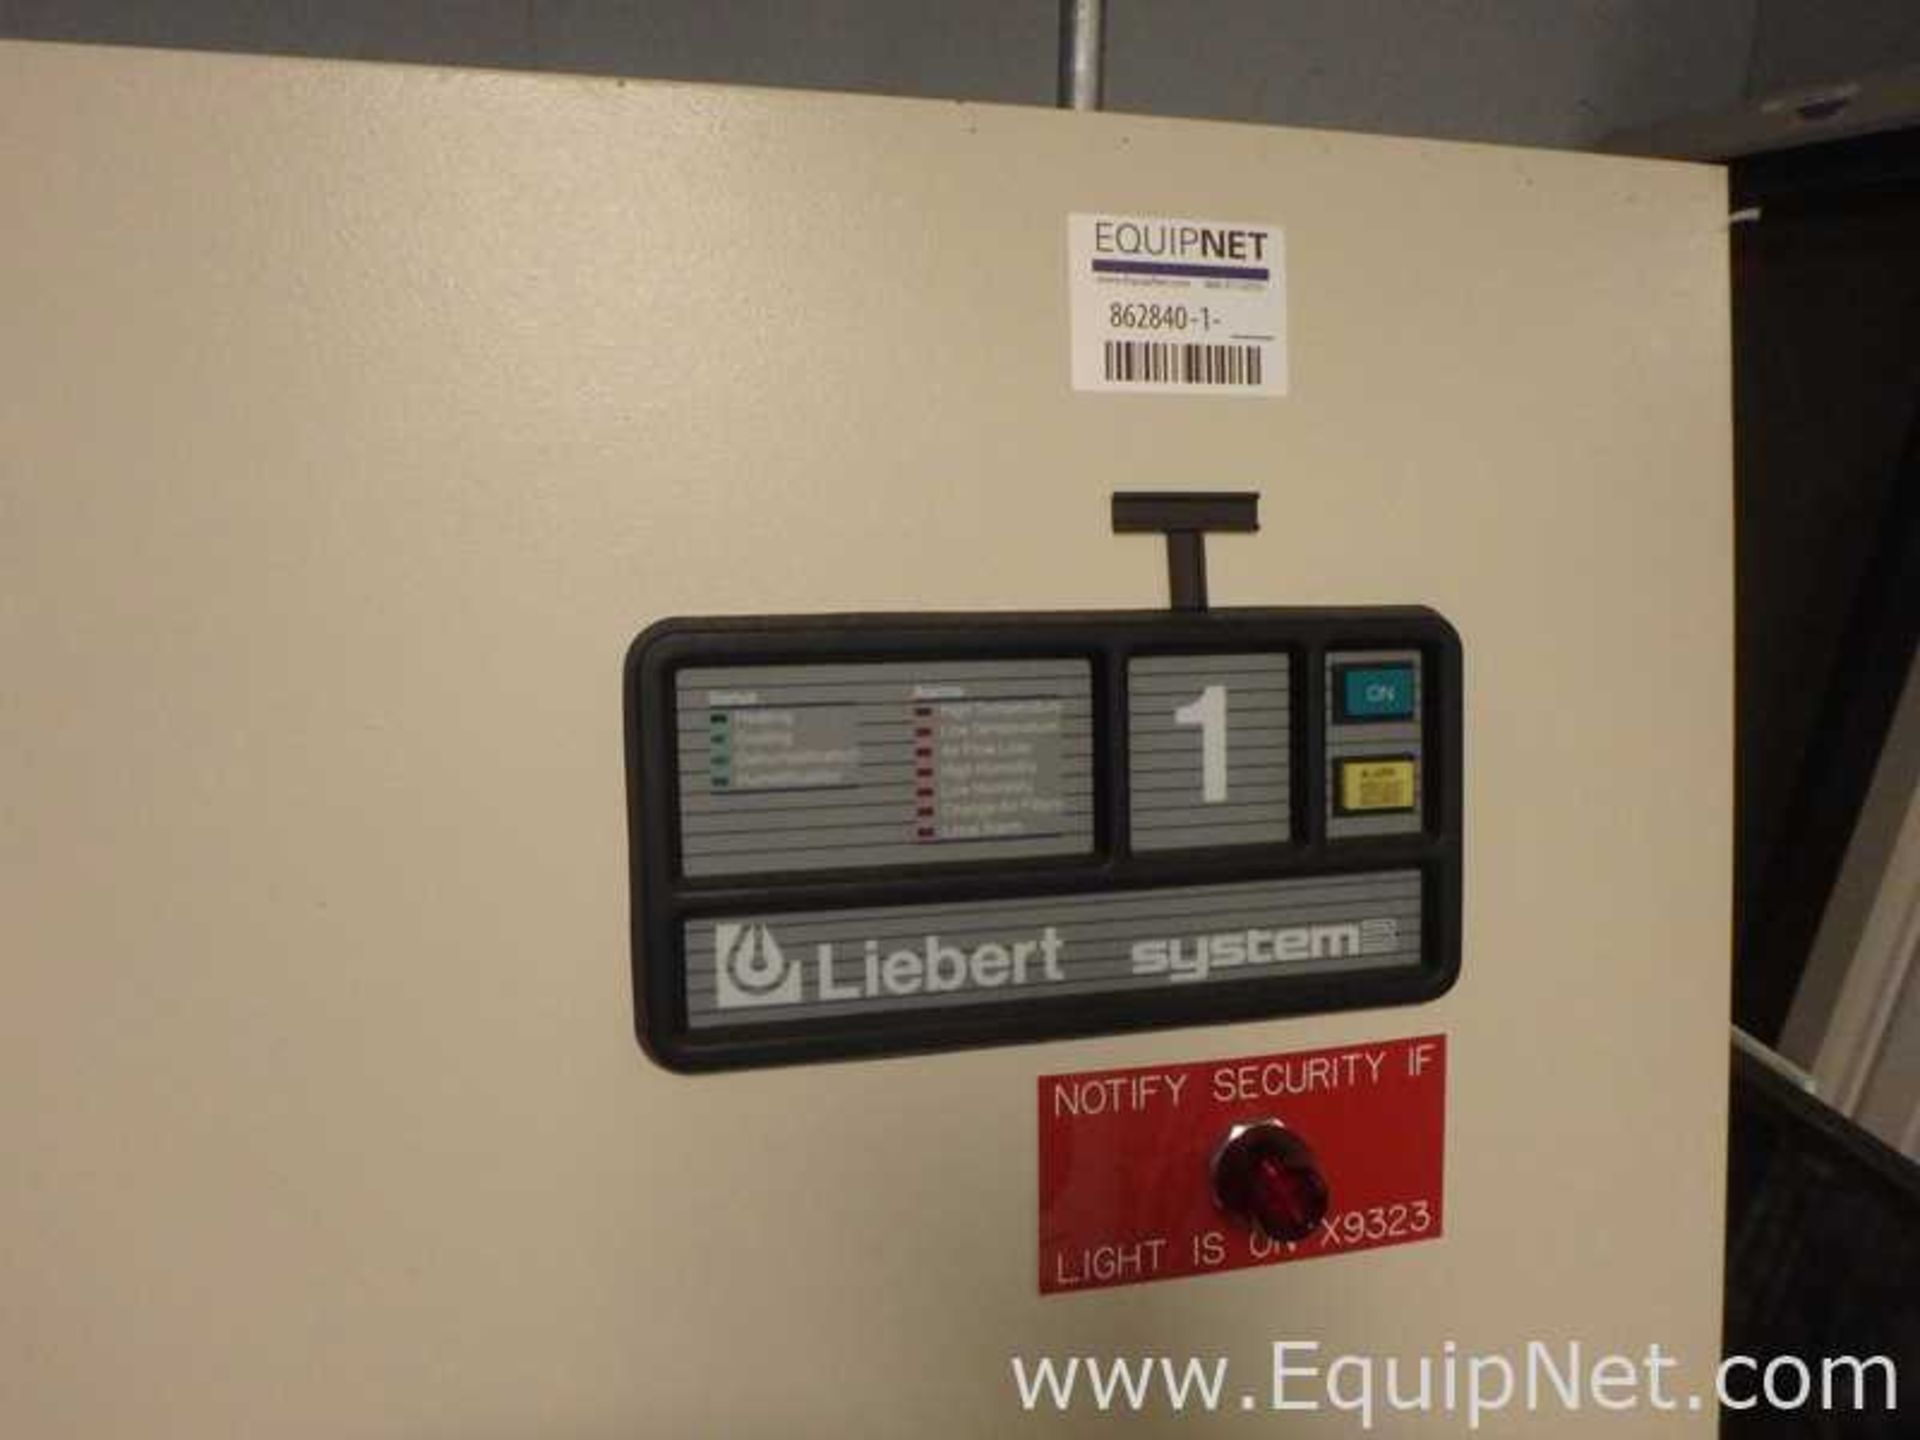 Liebert System 3 FH199A-A00 Universal Precision Cooling System - Image 3 of 7